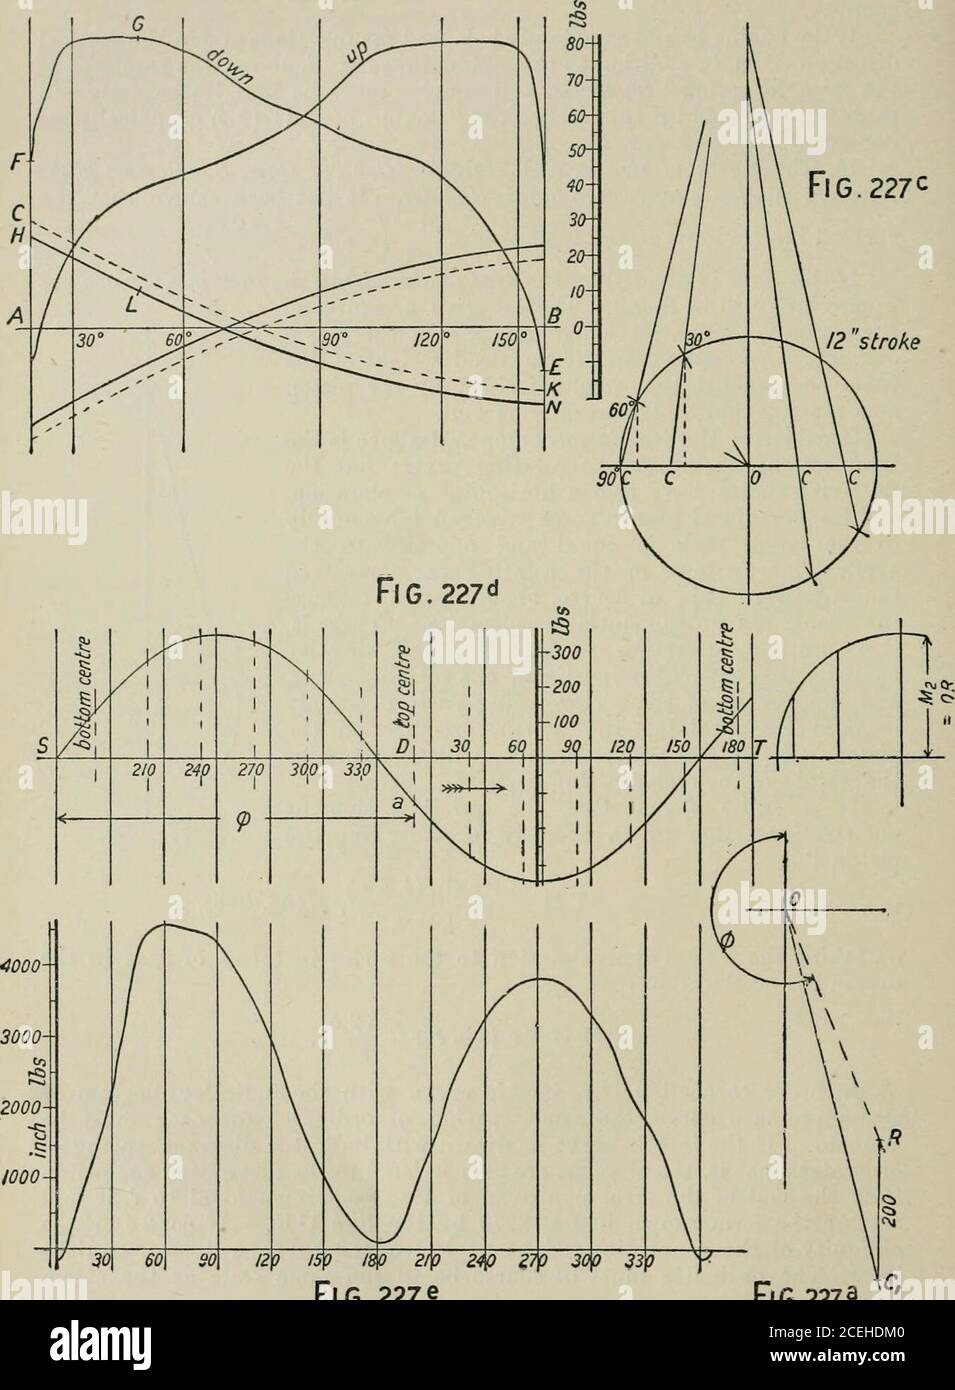 . A manual of marine engineering: comprising the design, construction, and working of marine machinery. Fit,. 226. TM = (fig. 226), or, taking the second approximation to the series in terms of ^, as in thecase of the acceleration (par. 4), T M = P r ( sin ^ + sin 2 6 In order to combine the inertia curve with the indicator diagram orsteam pressure curve, the same spacing of ordinates for each must beadopted. If the inertia curve be drawn with indicator diagram spacing otordinates (that is, the abscissse are proportional to the distance of the pistonfrom the end of the stroke) instead of absc Stock Photo